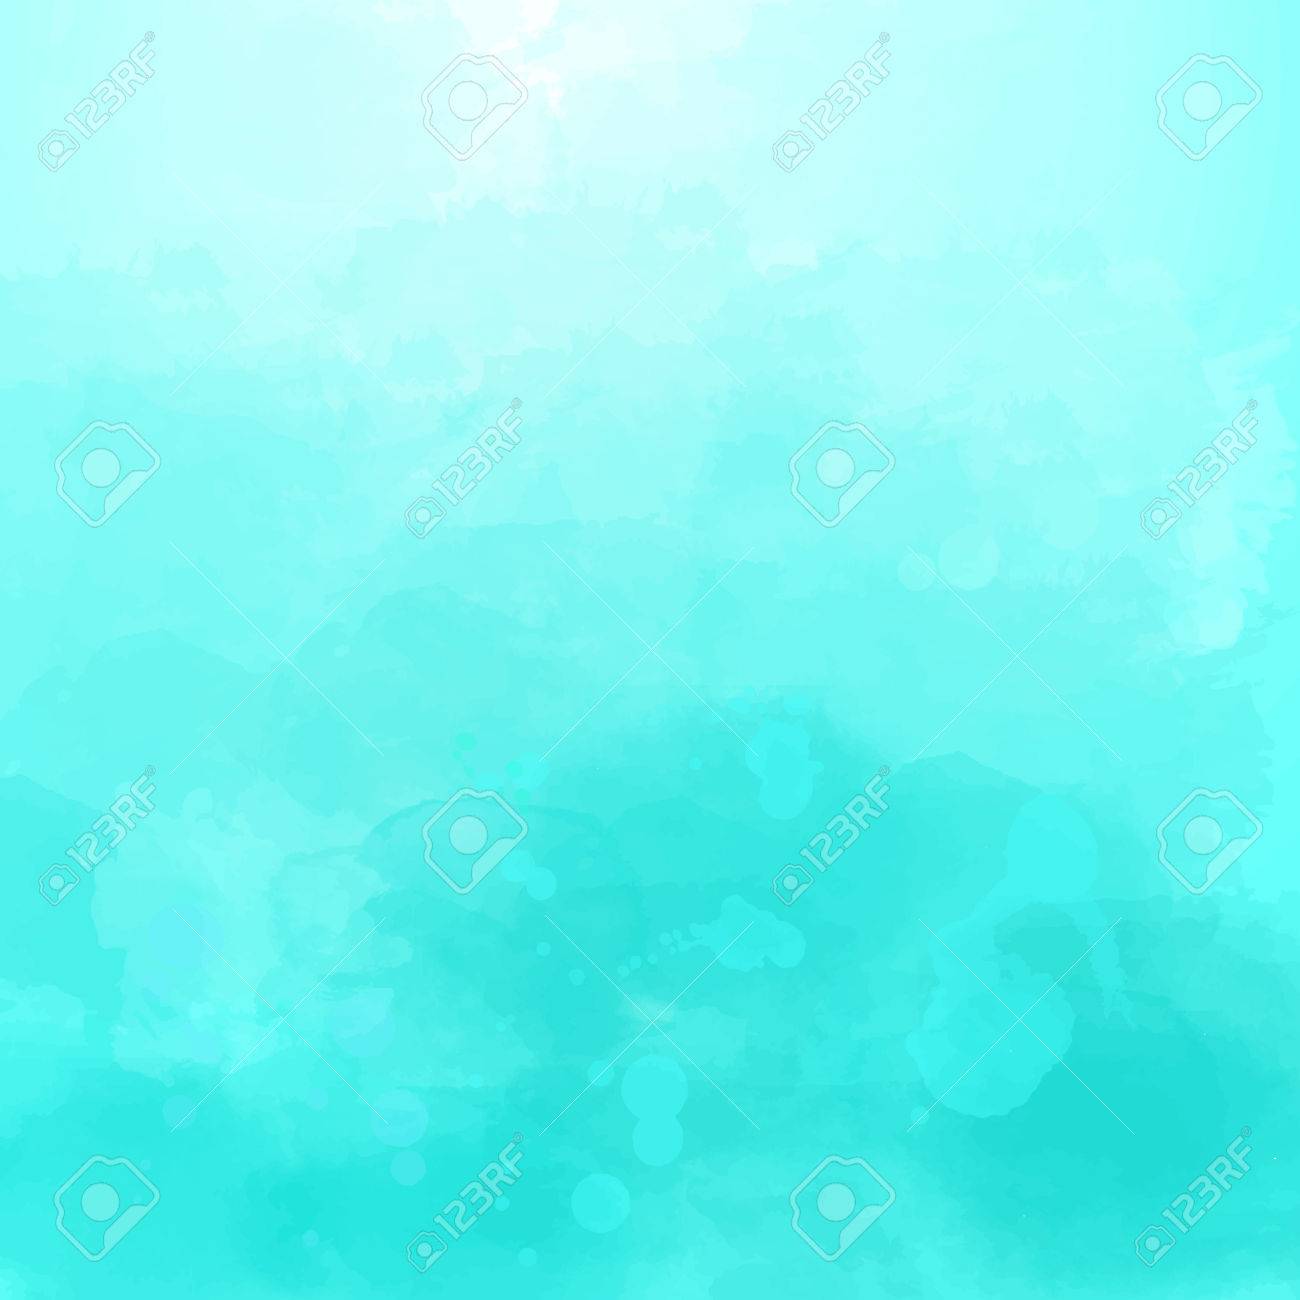 Abstract Sky Blue Background With Watercolor Splashes And Swashes